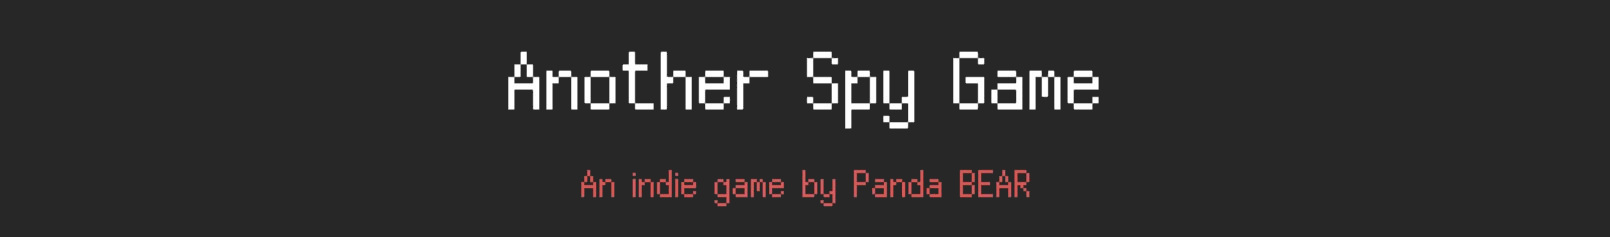 Another Spy Game